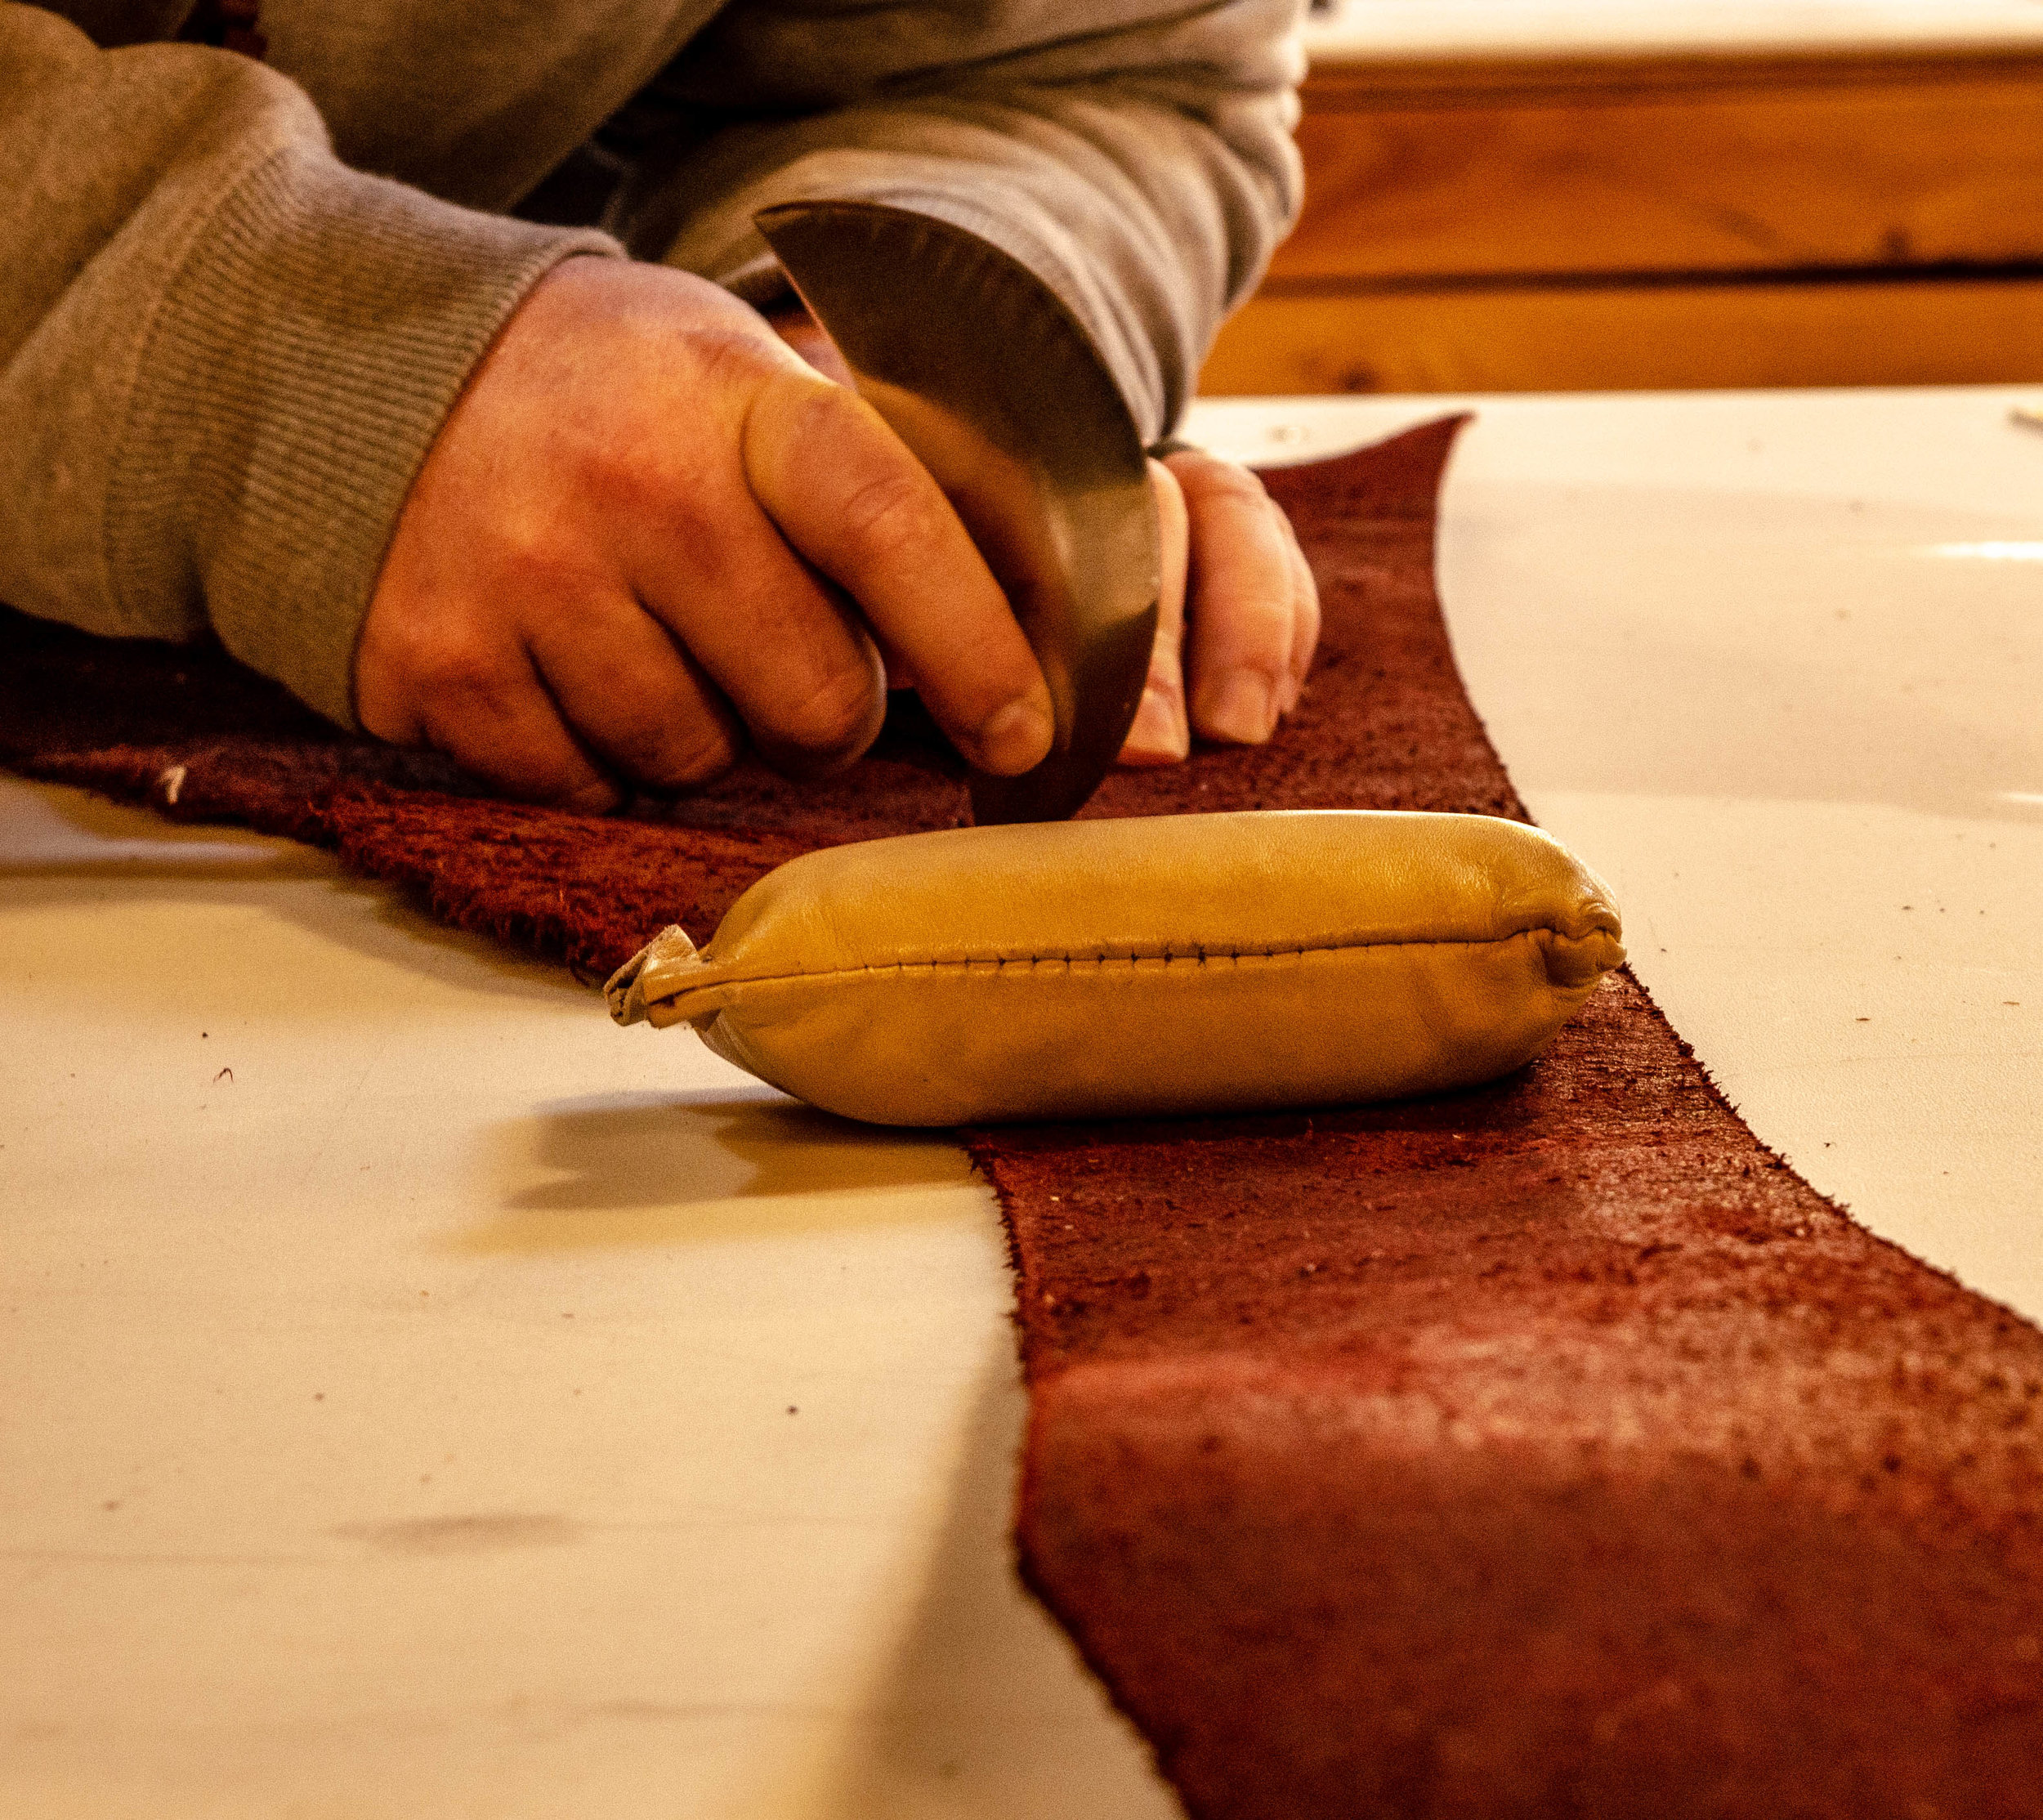 Traditional Skills Class at Alden's School of Leather Trades